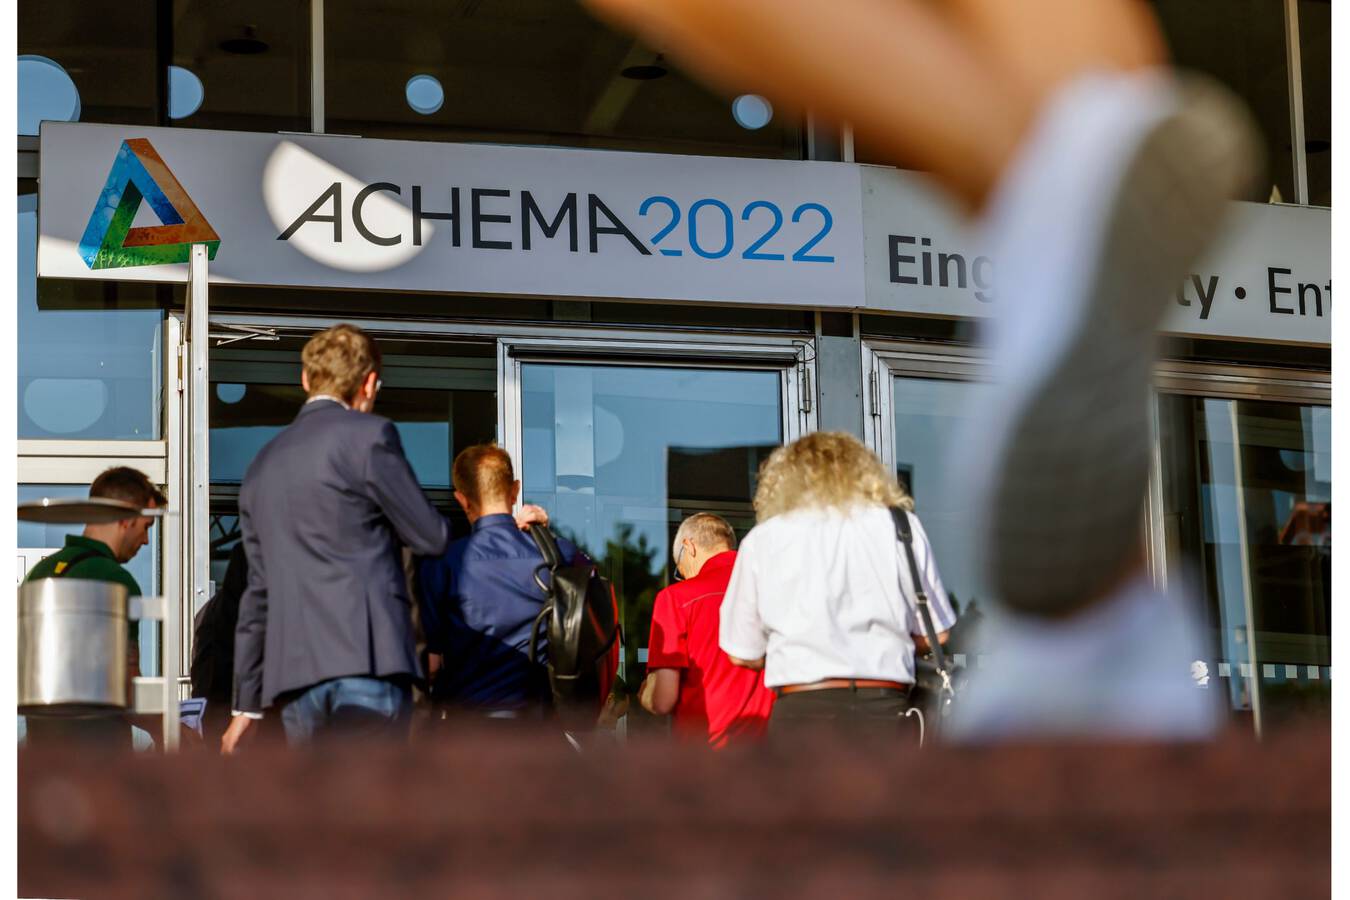 ACHEMA 2022 offered new impulses to the process industry from 22 to 26 August.